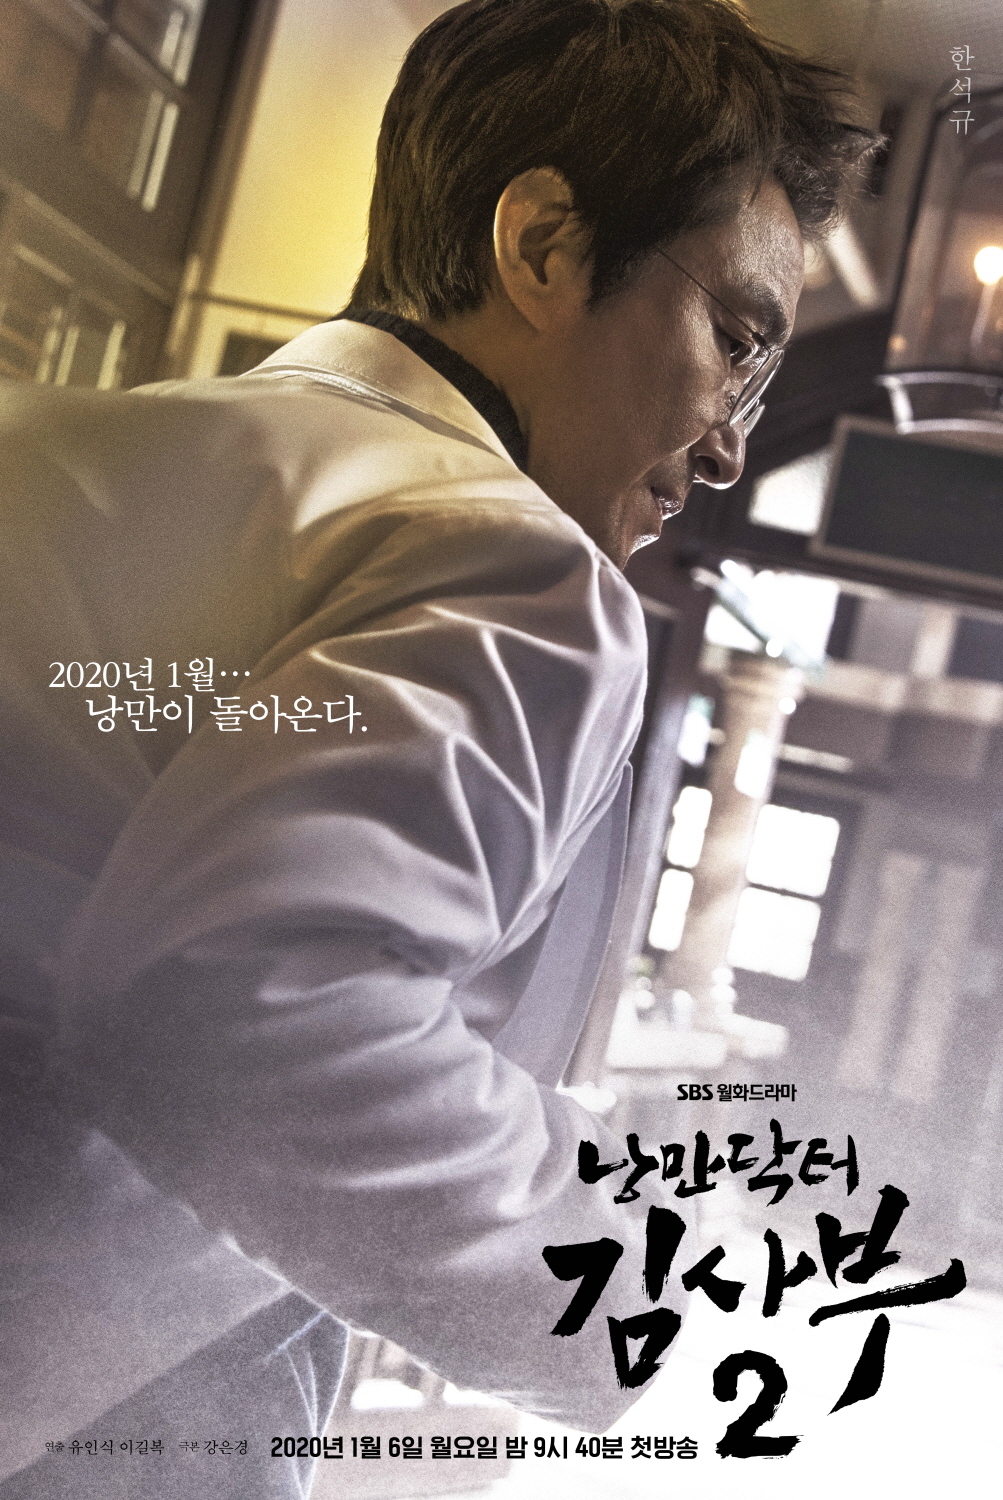 Seoul = = In January 2020, SBS Romantic Doctor Kim Sabu 2, which will convey the hot echo and the touching impression, unveiled the main poster that predicts the new romantic era.SBS New Moonwha Drama Romantic Doctor Kim Sabu 2 (playplayplay by Kang Eun-kyung/directed by Yoo In-sik/produced by Samhwa Networks) is a real Doctors story that takes place in the background of a shabby stone wall hospital in the province, and it contains the contents of meeting the geeky genius doctor Kim Sabu (Han Suk-kyu) to find the real romance of life.Following the first episode that covered the Republic of Korea with a romantic wave in 2016, it is expected to attract the house theater with a richer and more exciting episode and an impact-strong narrative.In this regard, two main posters, which contain the symbolic meaning of Romantic Doctor Kim Sabu 2, are being unveiled and focused attention.The nine-member Poster, featuring nine major cast members, including the title roll, Han Suk-kyus one-man Poster, and Han Suk-kyu Lee Sung-kyung Ahn Hyo-seop Jin Kyeong Im Won-hee Kim Min-jae Yun-jae Kim Joo-heon, So Ju-yeon, and Romantic Doctor Kim Sabu 1 and contextually It is completed with a unique watercolor tone color that is shared with each other, and it conveys the liveliness that seems to breathe alive.Han Suk-kyus one-man Poster intensely captured the return of Kim Sabu, who was finally returning to the romantic doctor Kim Sabu who had been waiting for three years.Han Suk-kyus charismatic side is clearly filled with Kim Sabu, who is busy walking through the middle of the corridor of Doldam Hospital.The charismatic Kim Sabus force, which passes by the doctors gown in the red hospital corridor as if the glow is falling, is making you expect a resonant move that will continue in Romantic Doctor Kim Sabu 2.In the 9-person Poster, where nine protagonists gathered in the emergency room of Doldam Hospital, the faces of characters with a completely different charm are causing tension.With Han Suk-kyu and Lee Sung-kyung and Ahn Hyo-seop looking at the state of the lying patient, Jin Kyeong and Kim Min-jae are concentrating on the patient with medical equipment waiting just behind the three.In addition, I am curious about Kim Joo-heon, who is making a heavy expression with his arms folded, and Im Won-hee, who is urgently calling somewhere, on the back of Yoon-tree, who is on the bed and performing CPR on the patient,Han Suk-kyu Lee Sung-kyung Ahn Hyo-seop Jin Kyeong Im Won-hee Kim Min-jae Yoon Ju-heon, and other nine leading characters serious and urgent expressions are amplifying their curiosity about various incidents that will be caused by entangled and entangled in Doldam Hospital in the future.Meanwhile, SBS Romantic Doctor Kim Sabu 2 will be broadcasted at 9:40 pm on Monday, January 6, 2020, following VIP.